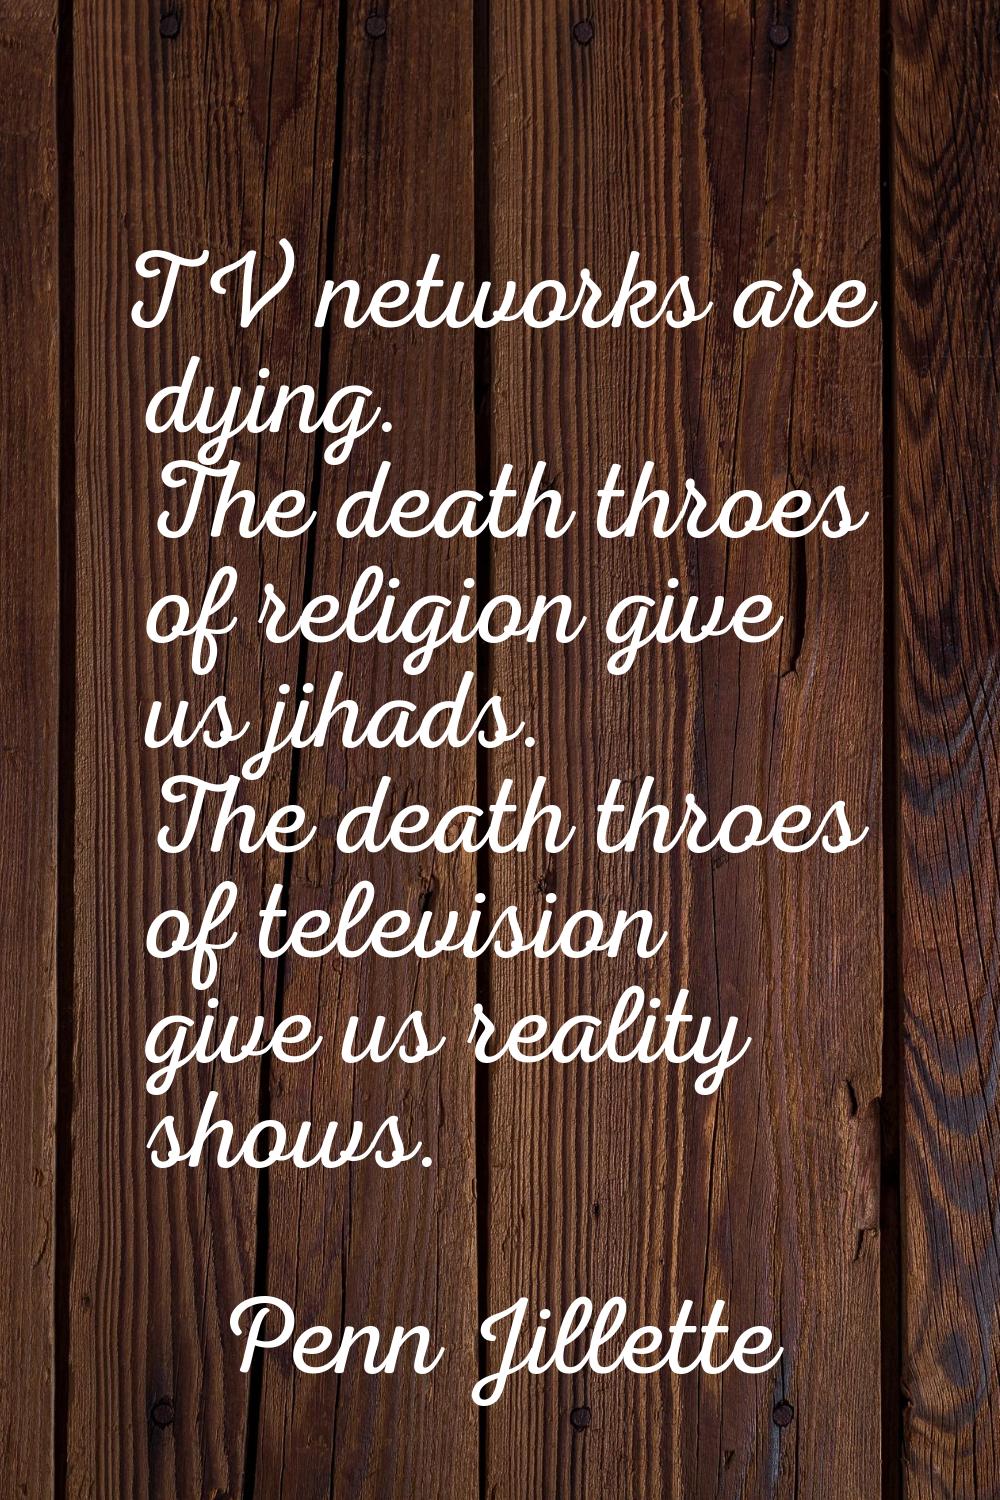 TV networks are dying. The death throes of religion give us jihads. The death throes of television 